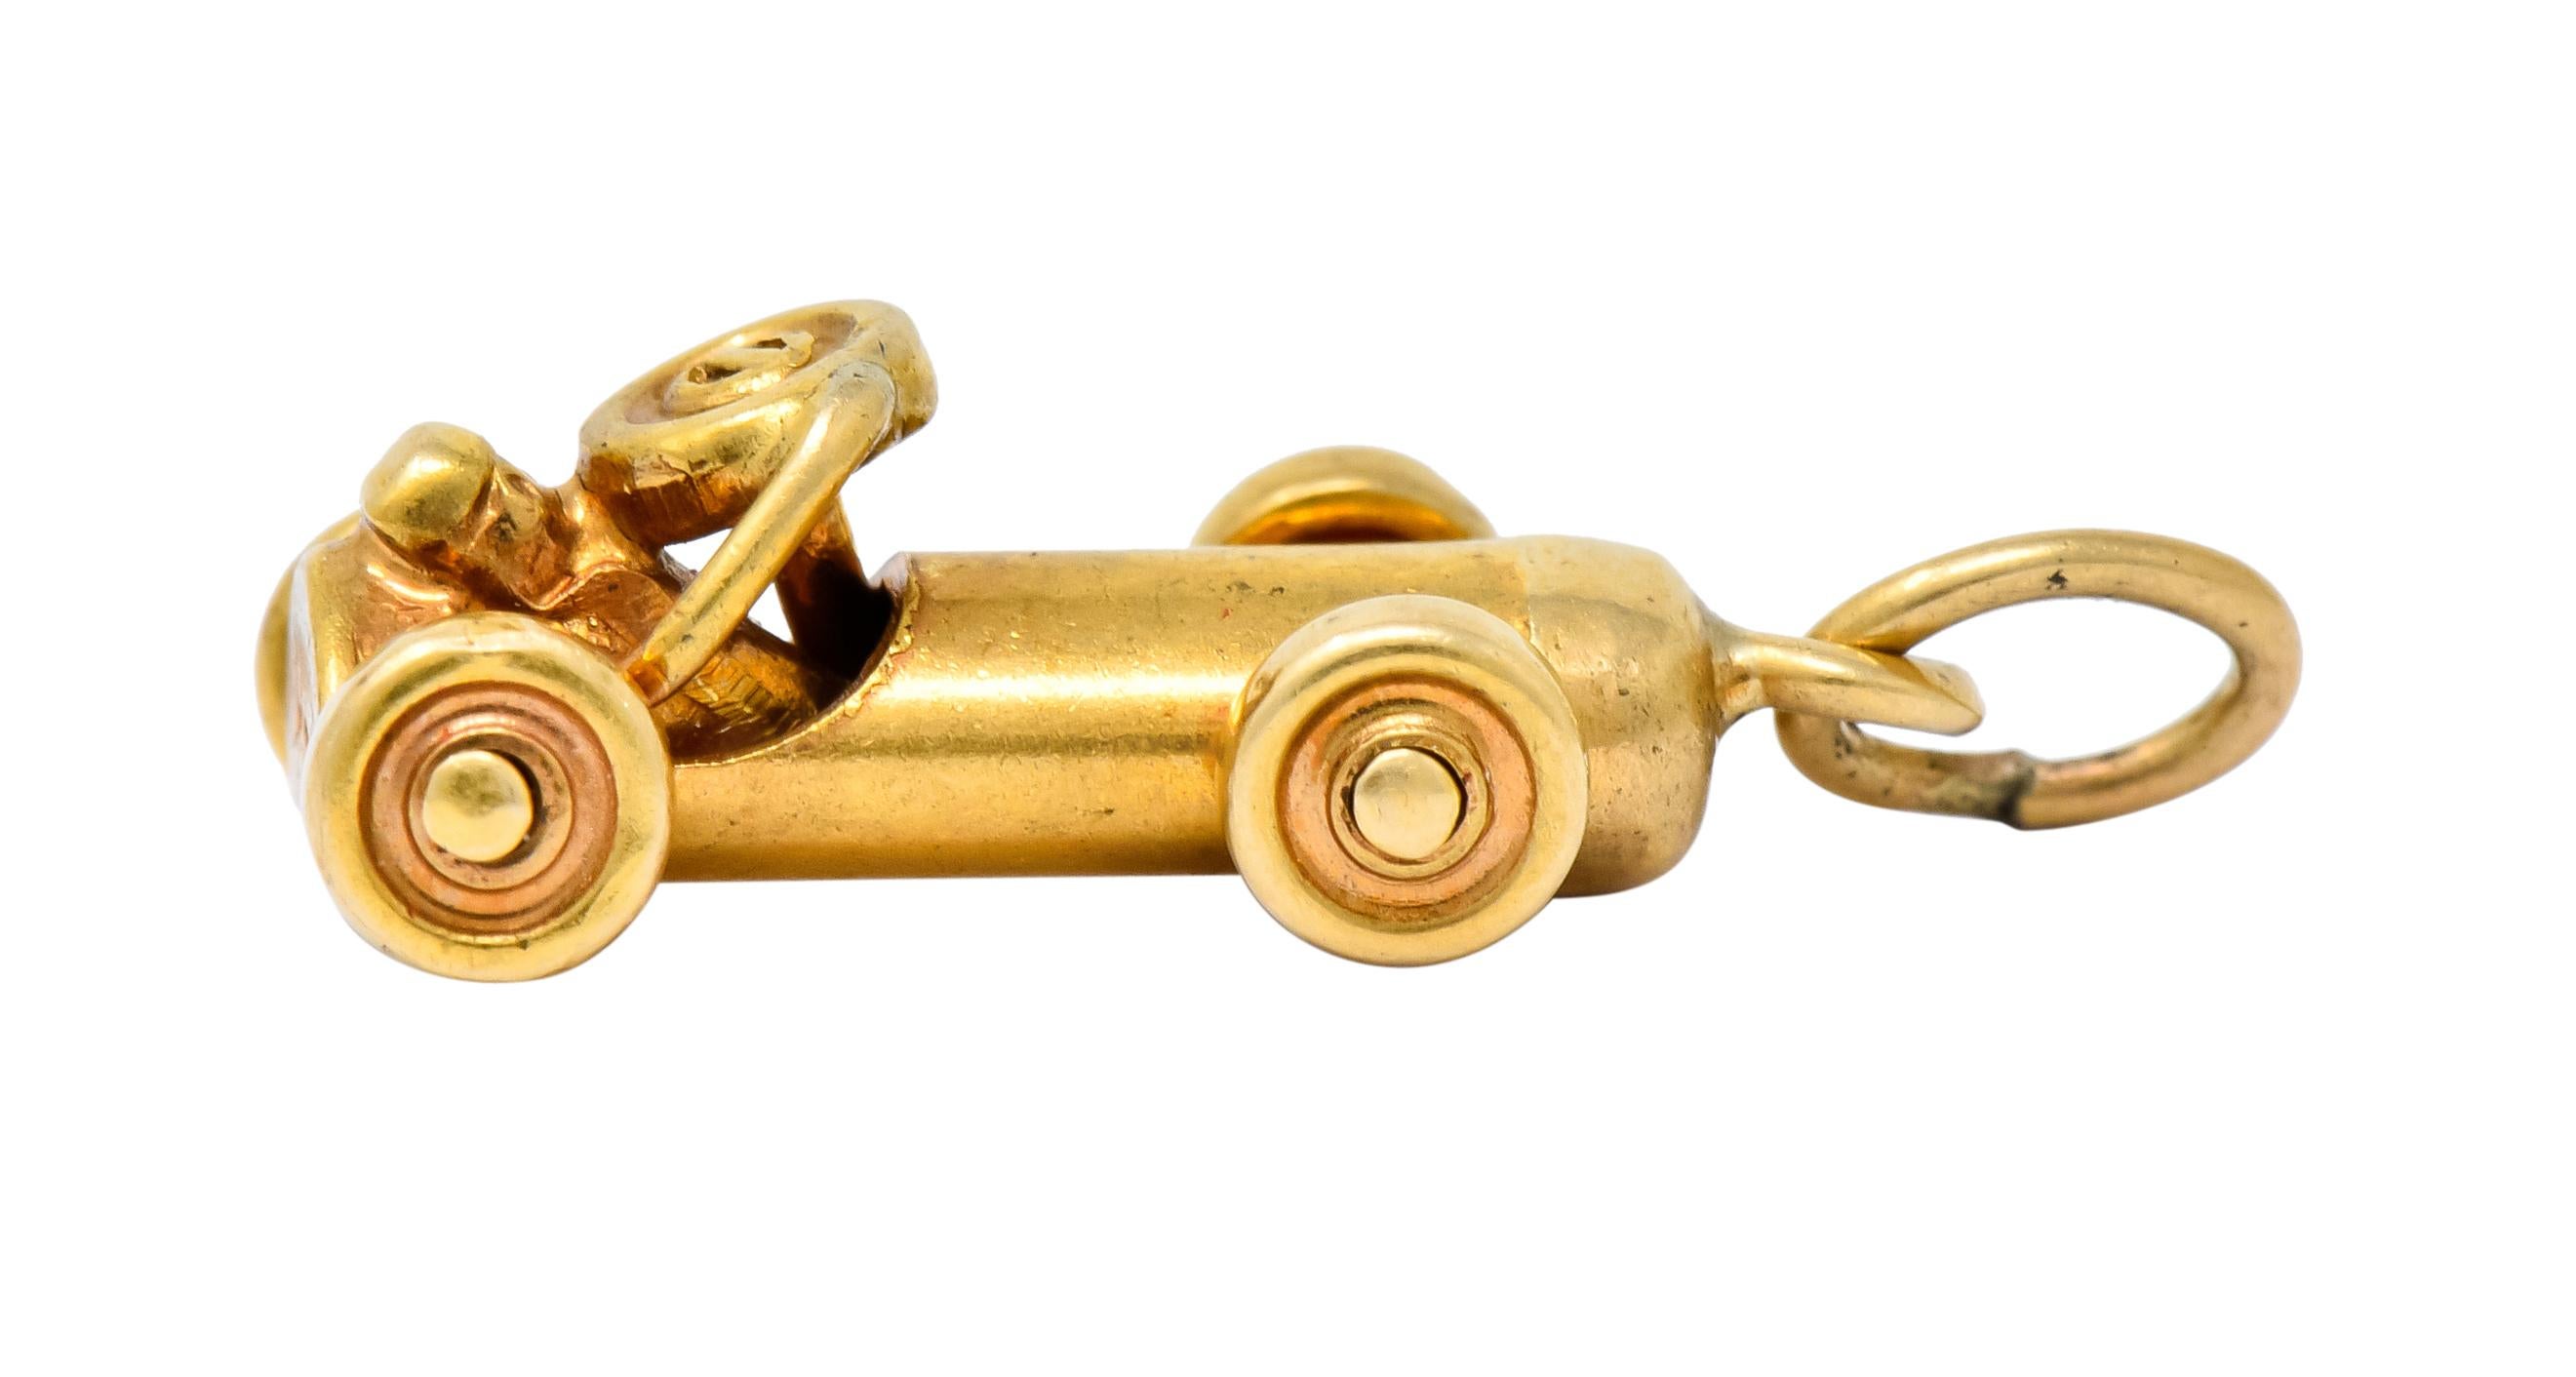 Charm designed as a classically streamlined soapbox derby car with a small reclining driver at the steering wheel

With articulated wheels and completed by a jump ring bale

Stamped 14K for 14 karat gold

Circa: 1930s

Measures: 3/8 x 3/4 inch